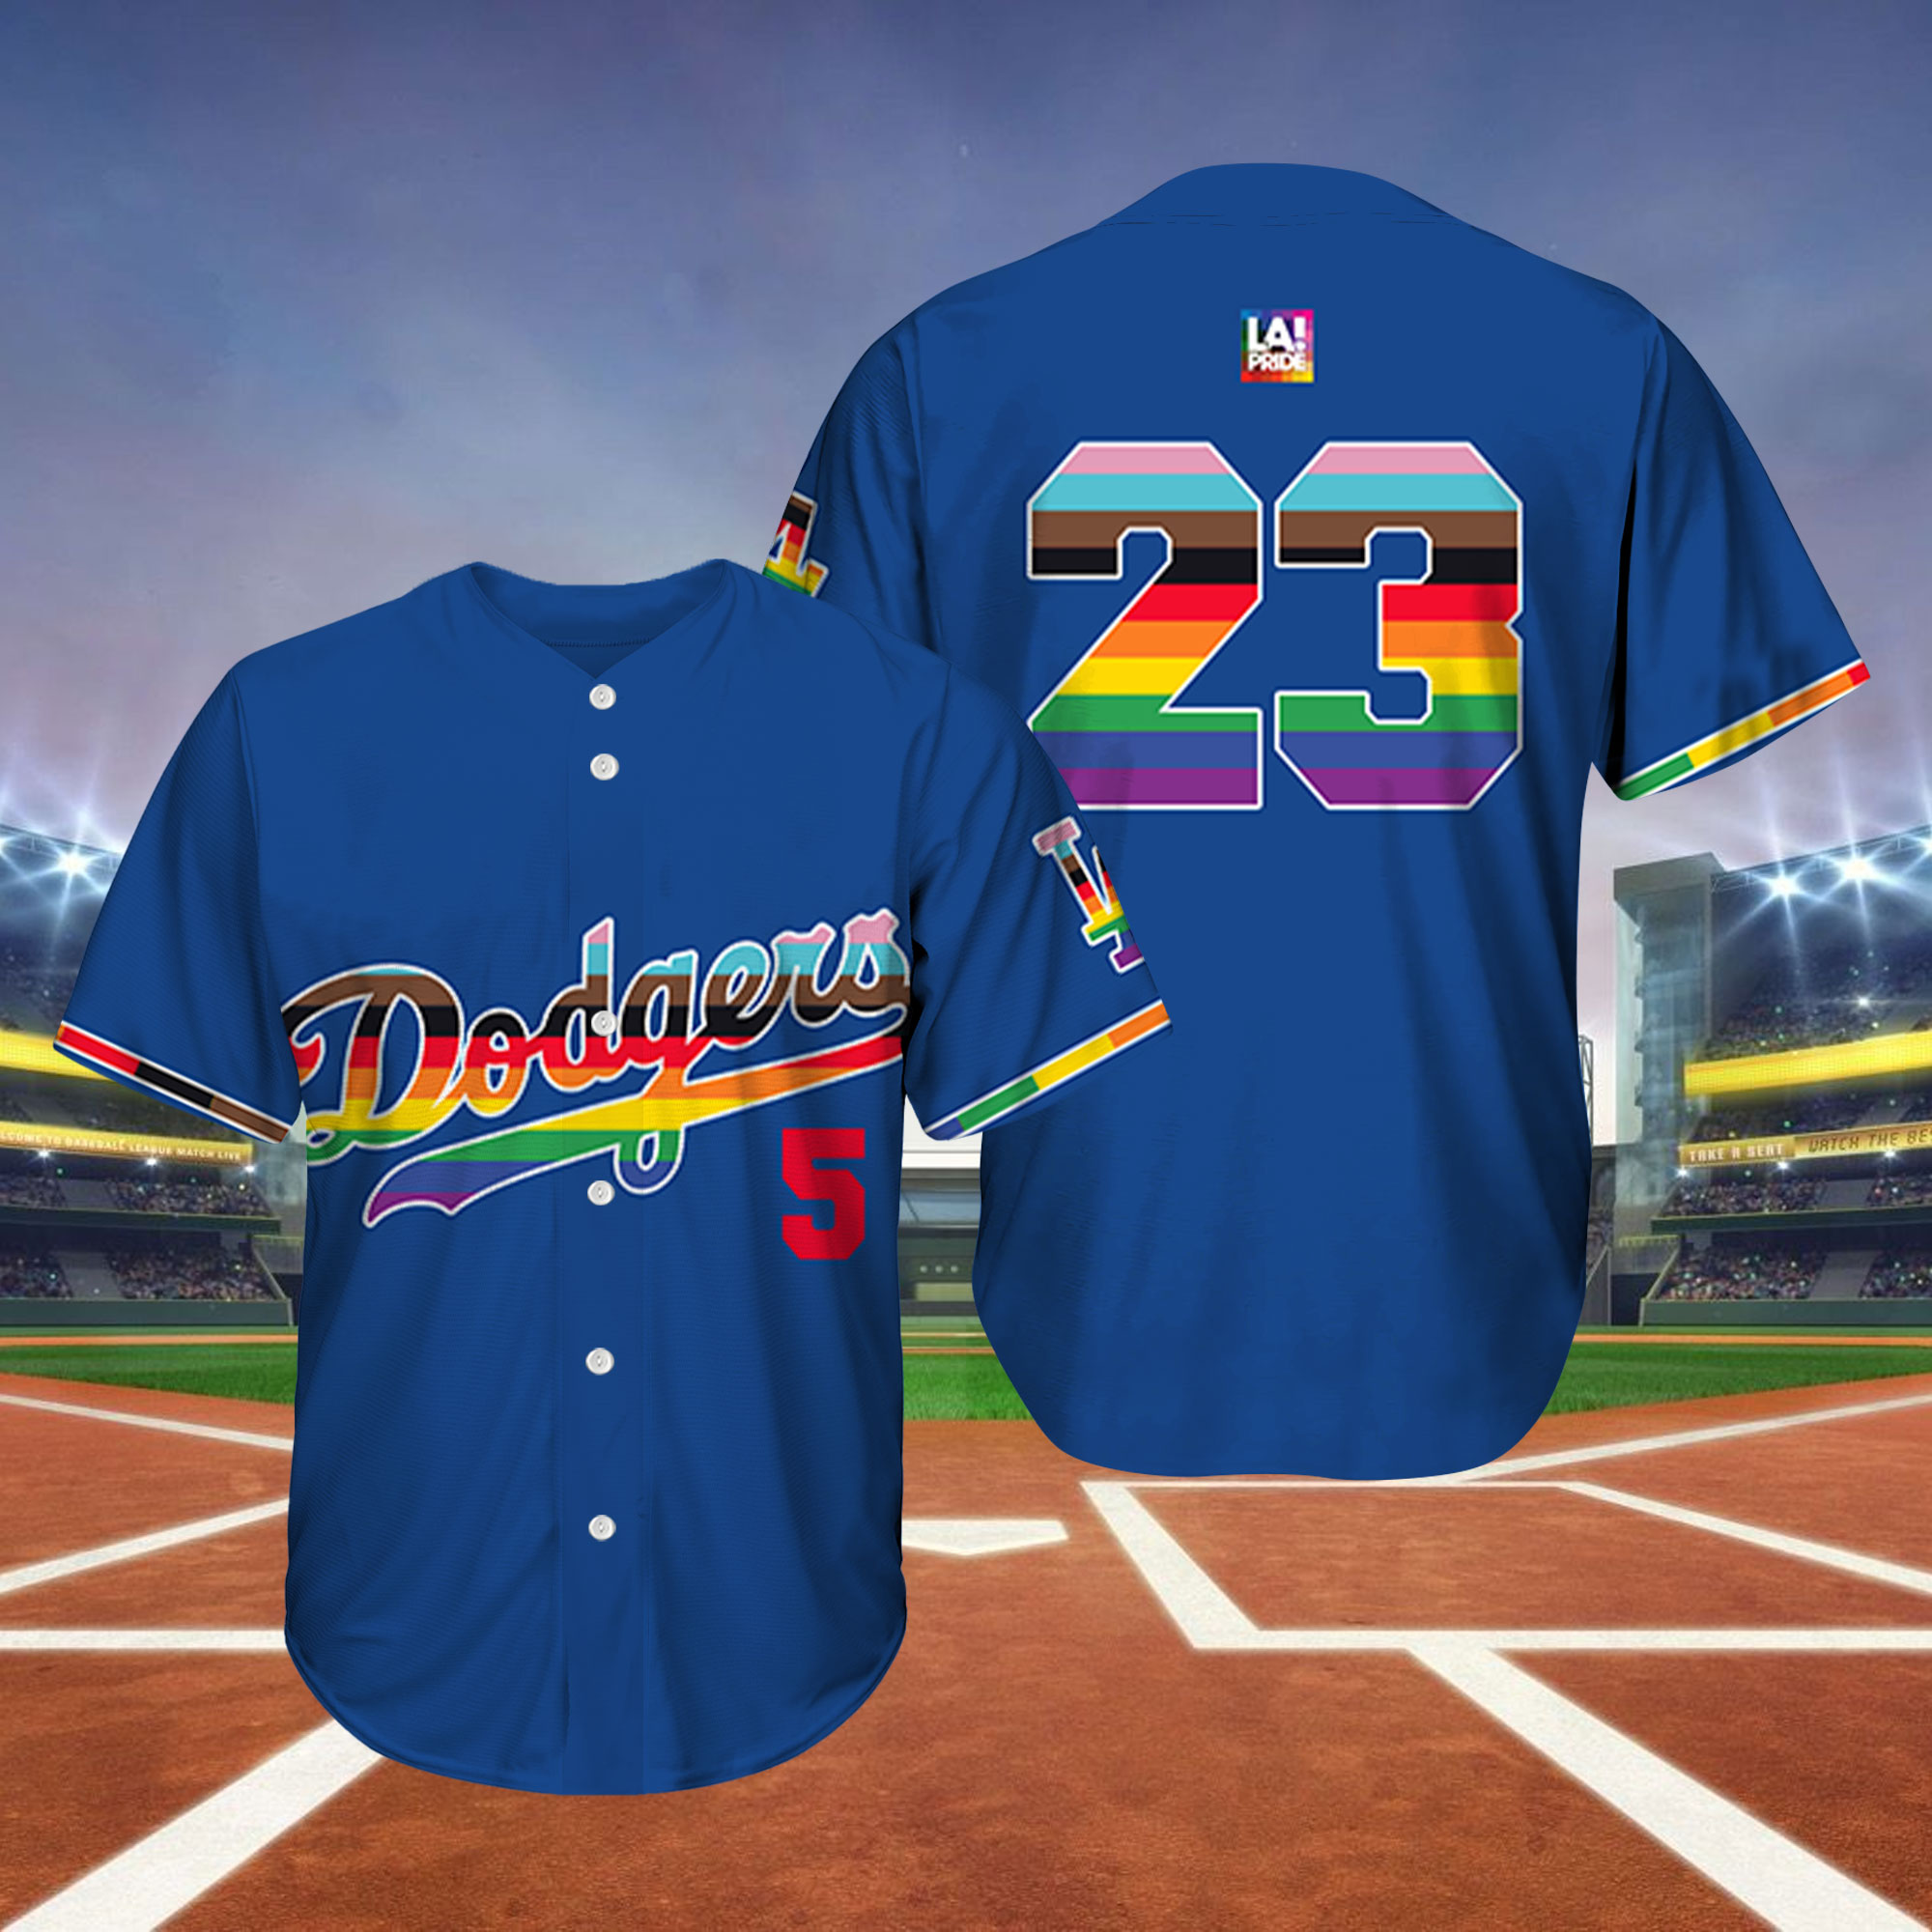 Best Dodgers gear and jerseys to show off your LA pride this